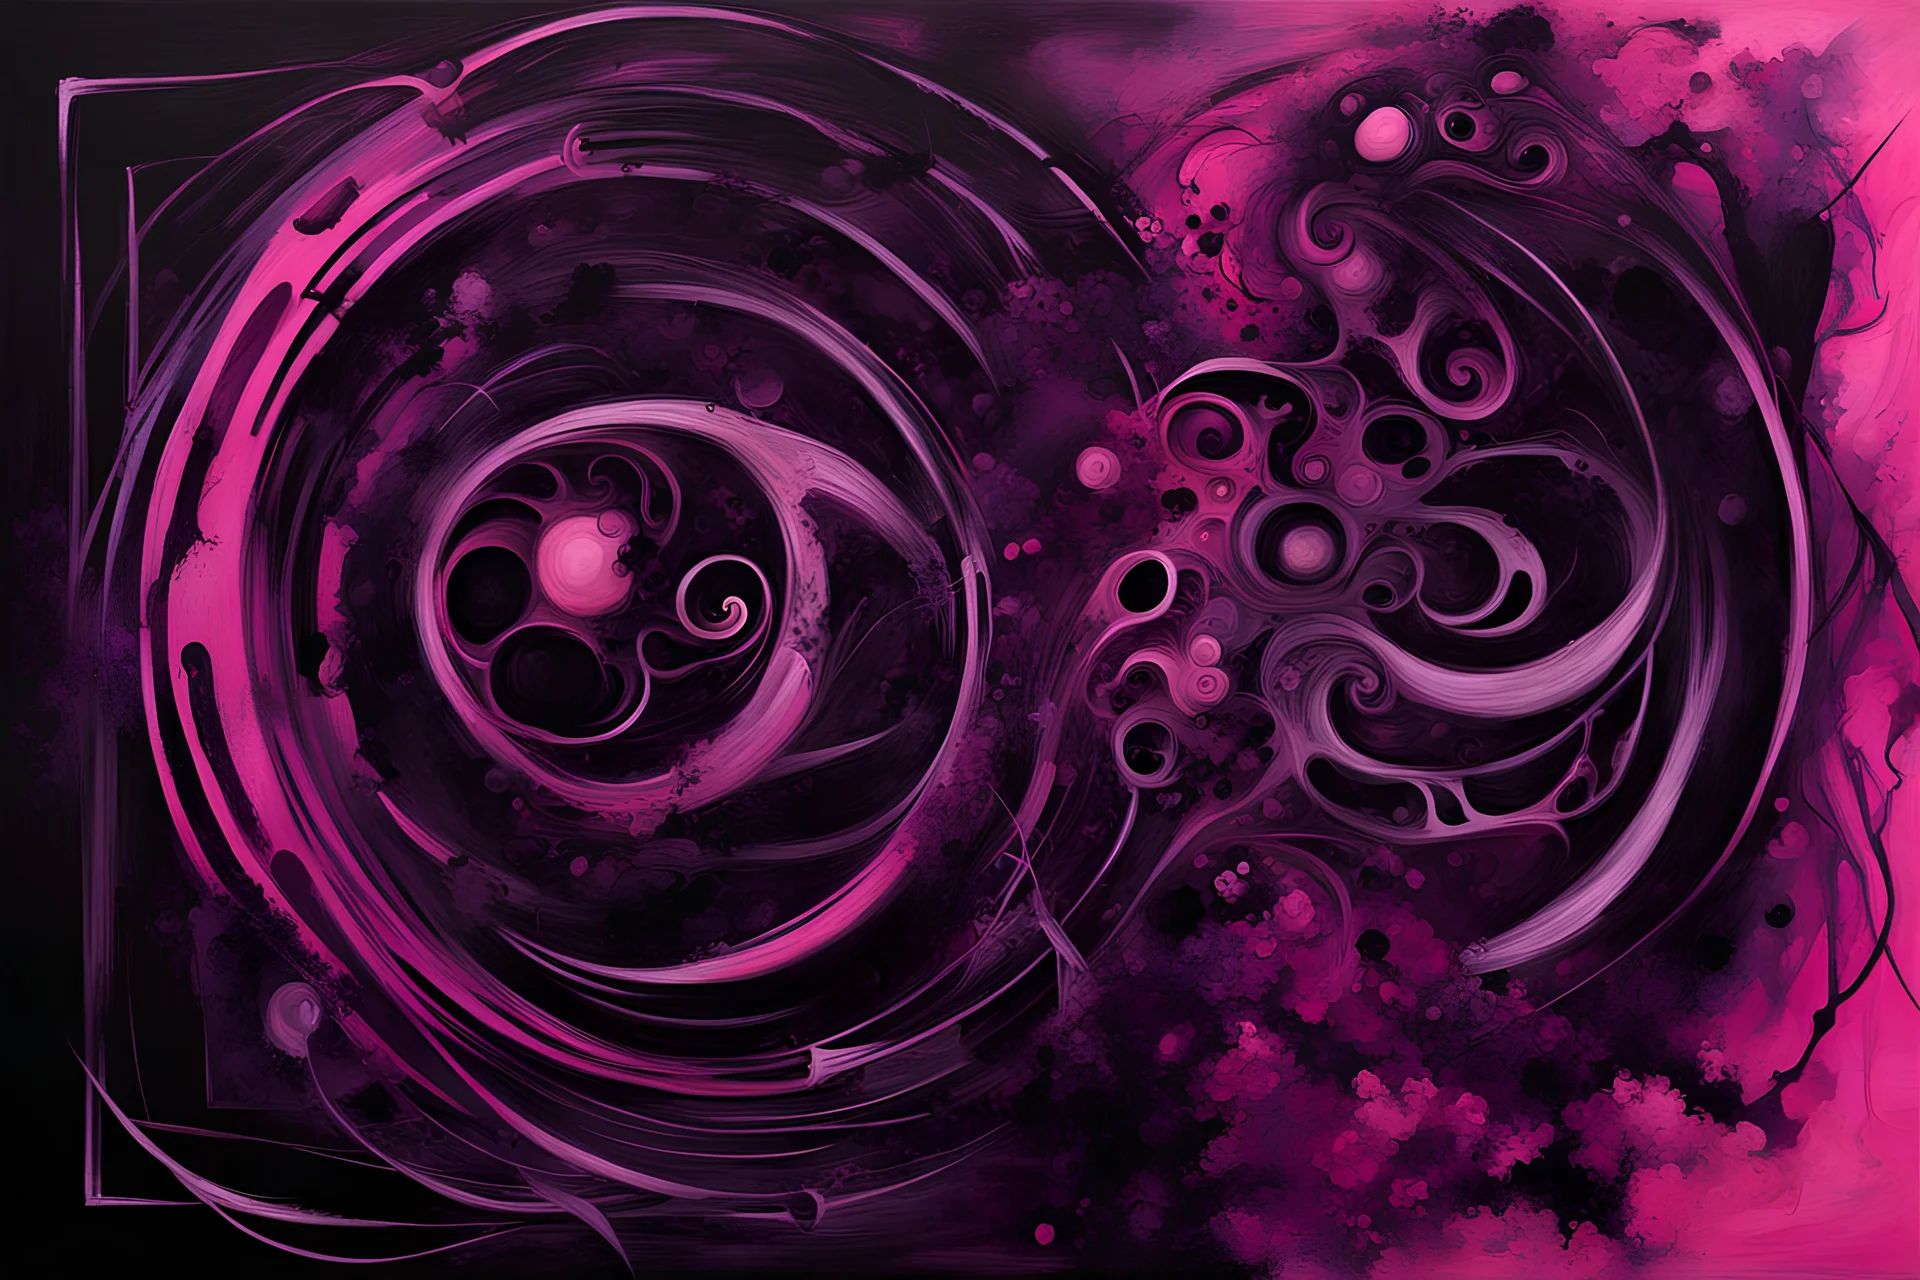 Pink, black, and purple abstract painting, gothic horror influence